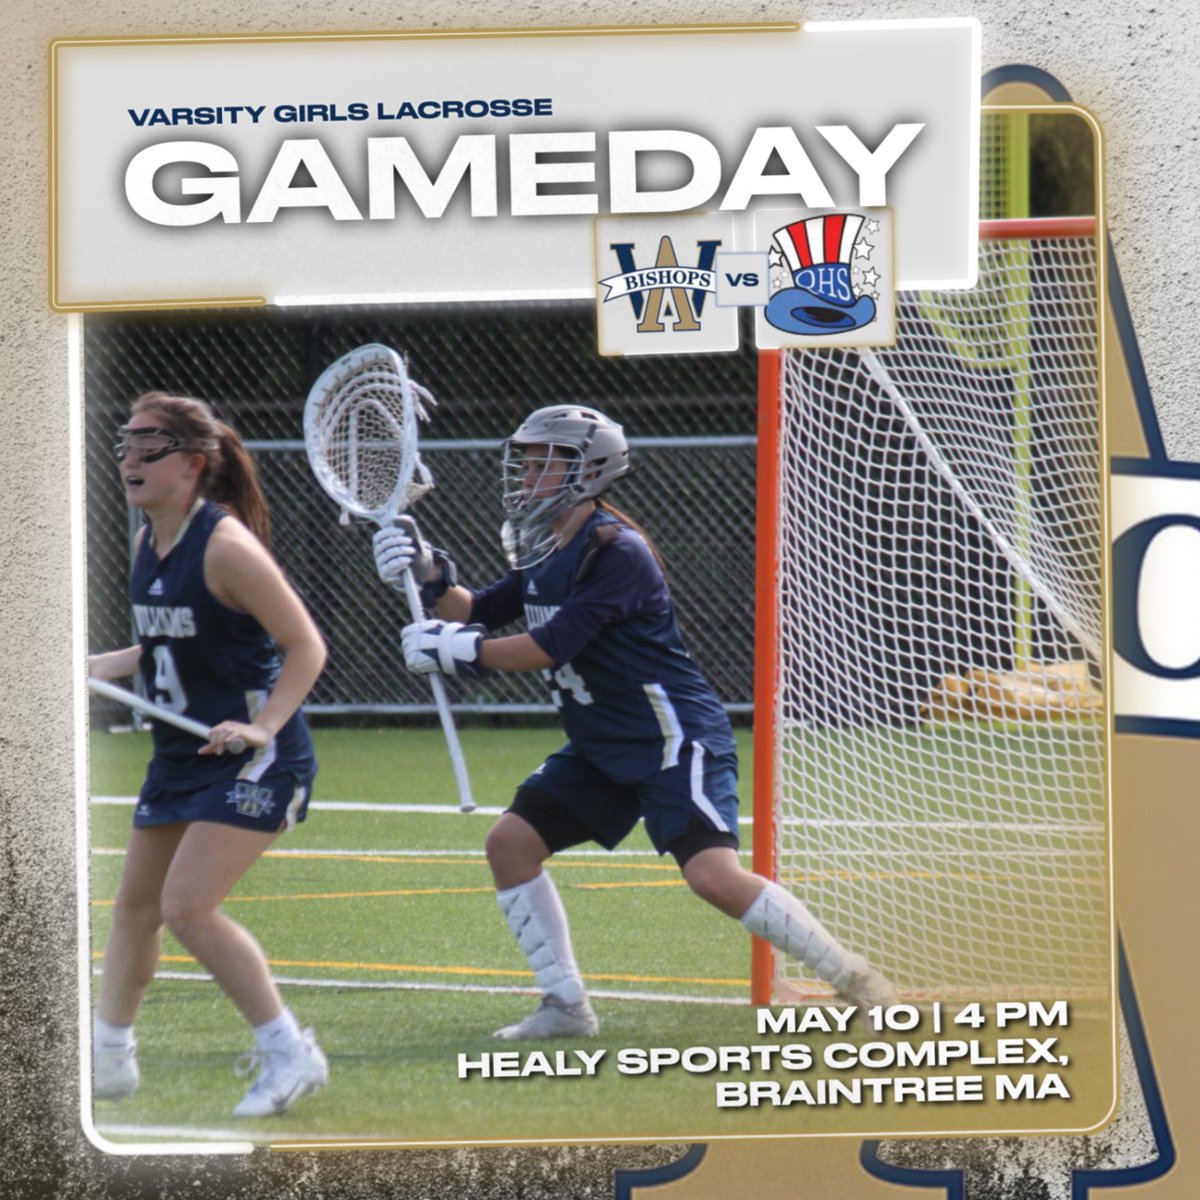 GIRLS LACROSSE: The Bishops host the @QHSathletics today at the Healy Sports Complex! Varsity starts at 4pm and JV to follow at 5:45pm! #rollbills @awhsglax